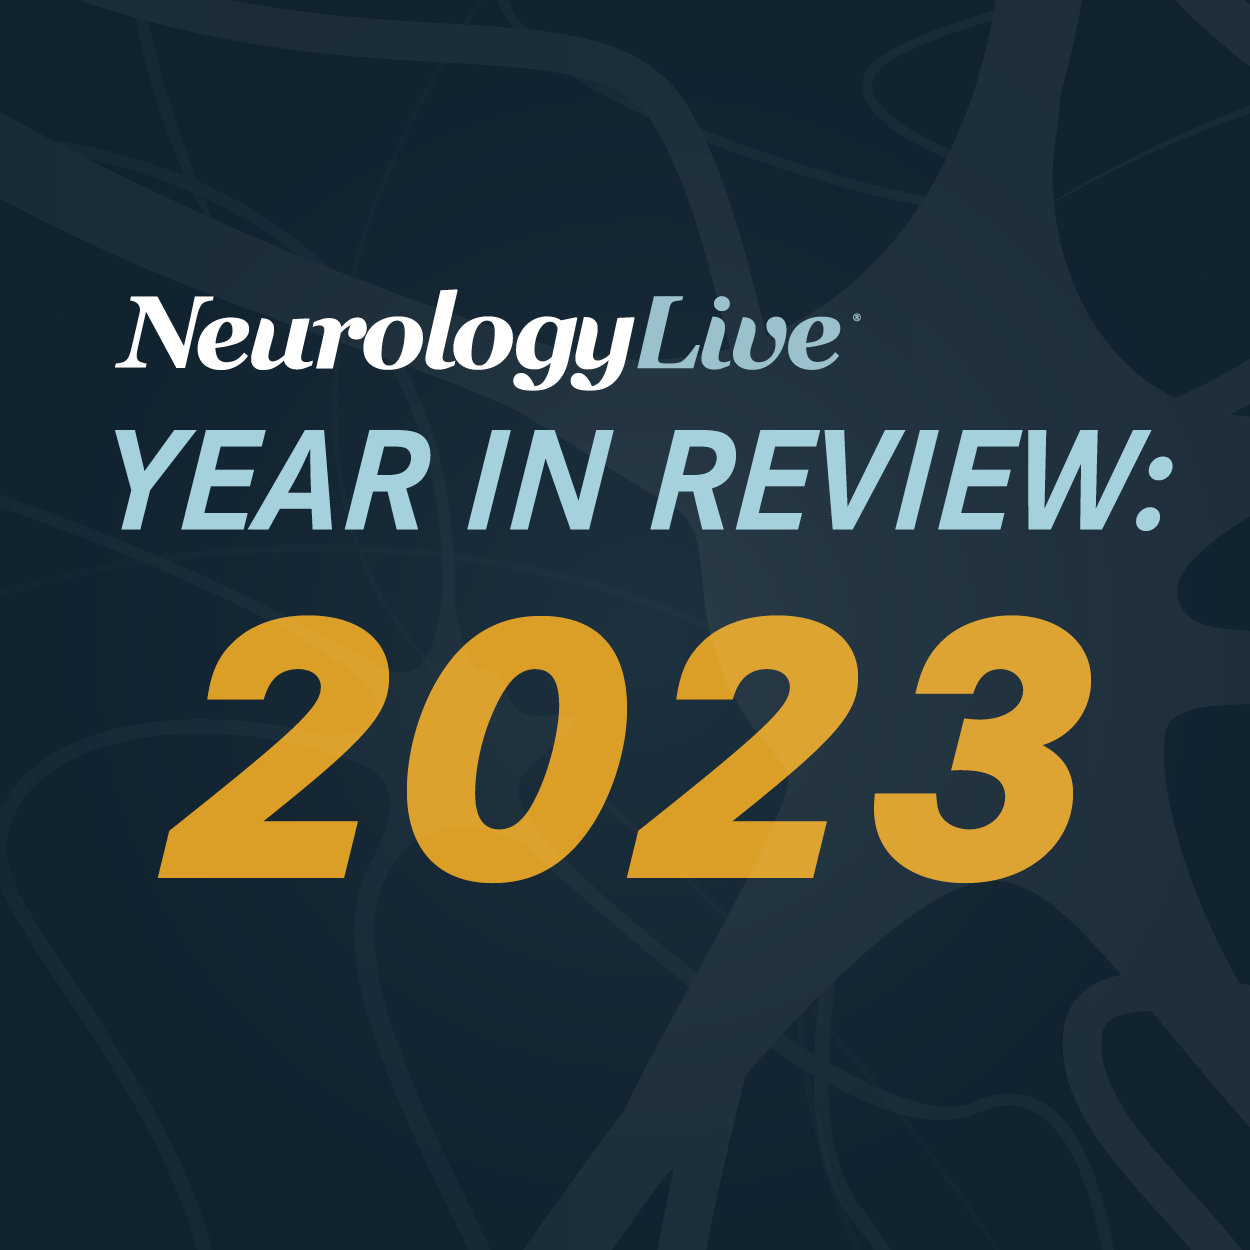 NeurologyLive® Year in Review 2023: Top Stories in Stroke and Cerebrovascular Disease